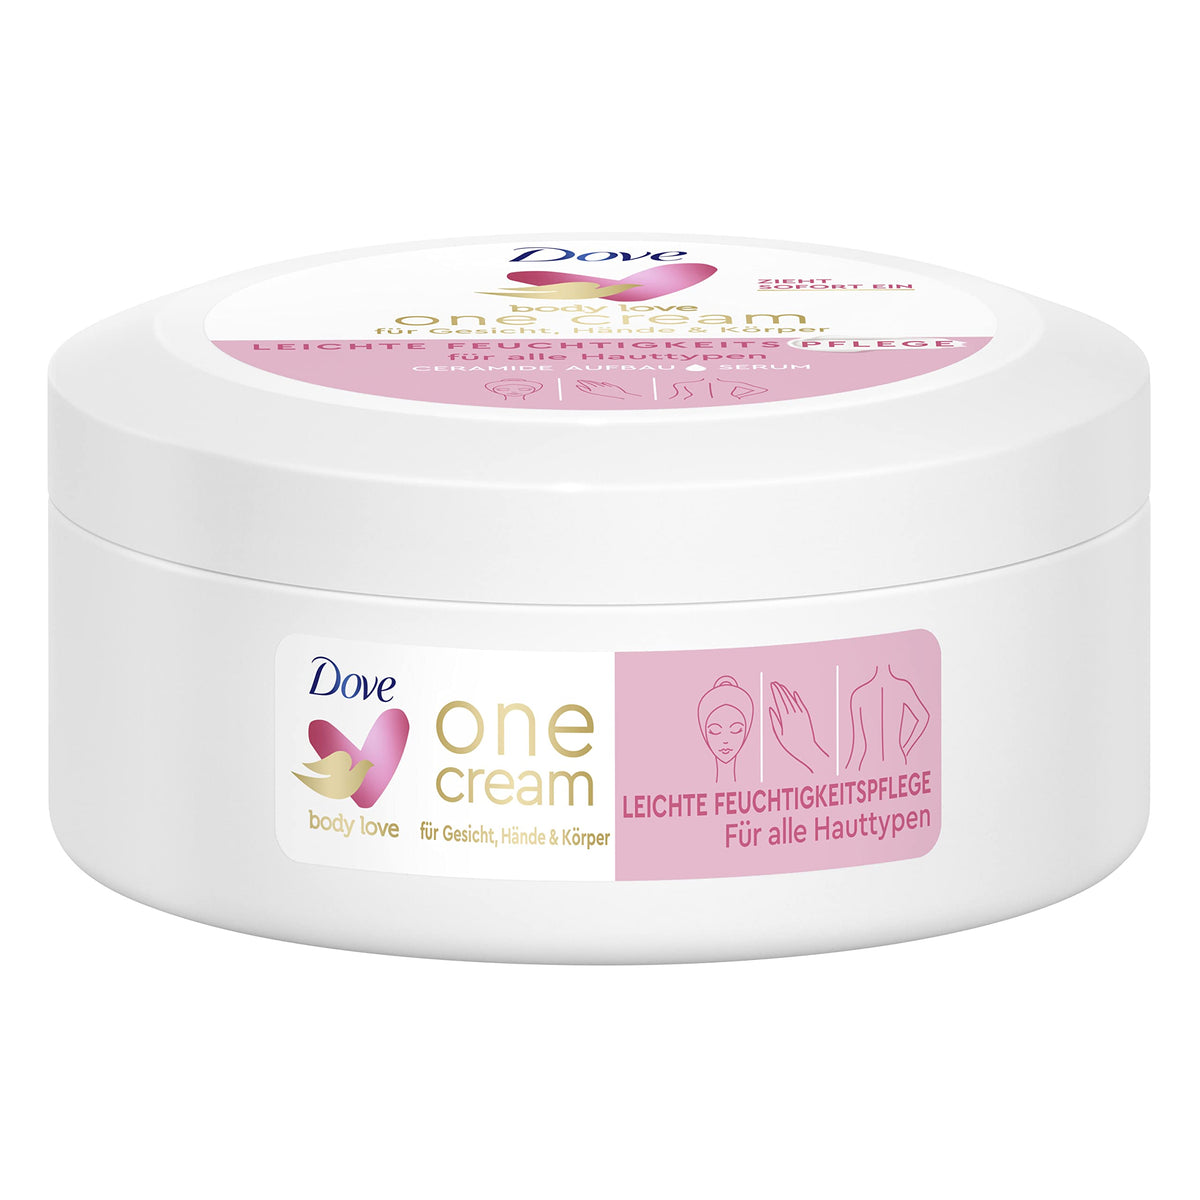 Dove Body Love One Cream Lightweight Moisturising Body Cream for Face, Hands and Body for All Skin Types 250 ml Pack of 1